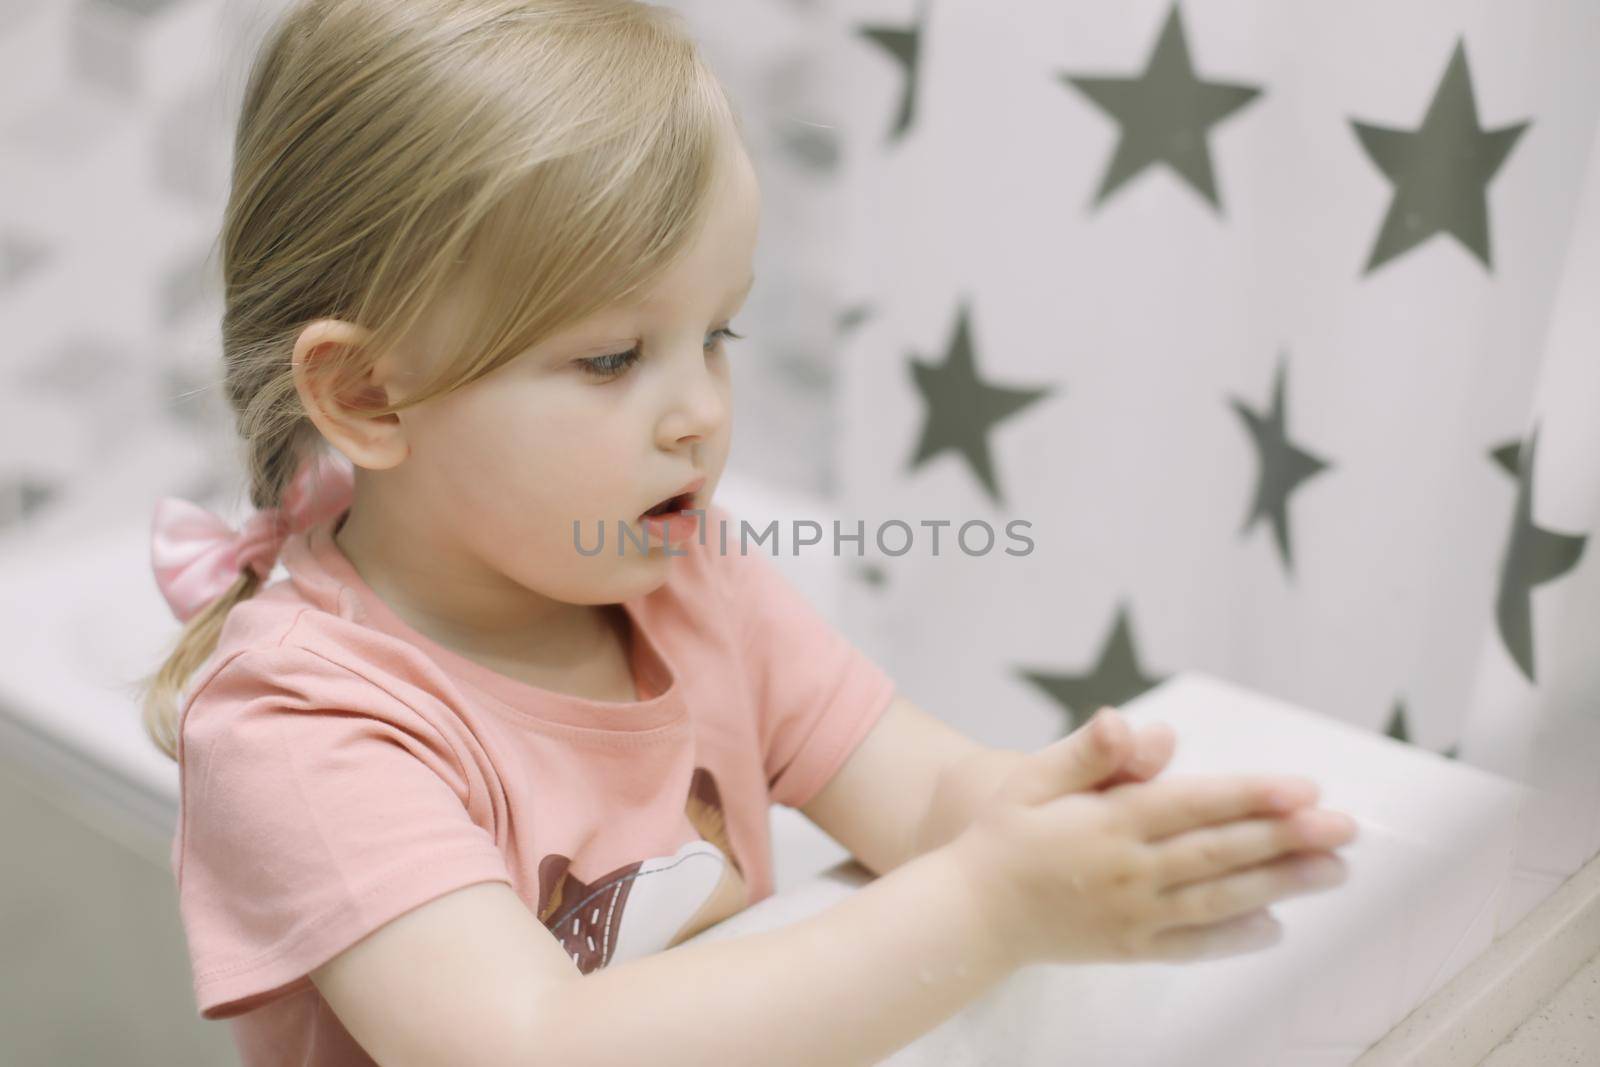 Little toddler girl in bathroom washing hands. Cute sweet baby play in water. Healthy, Child Hygiene concept.